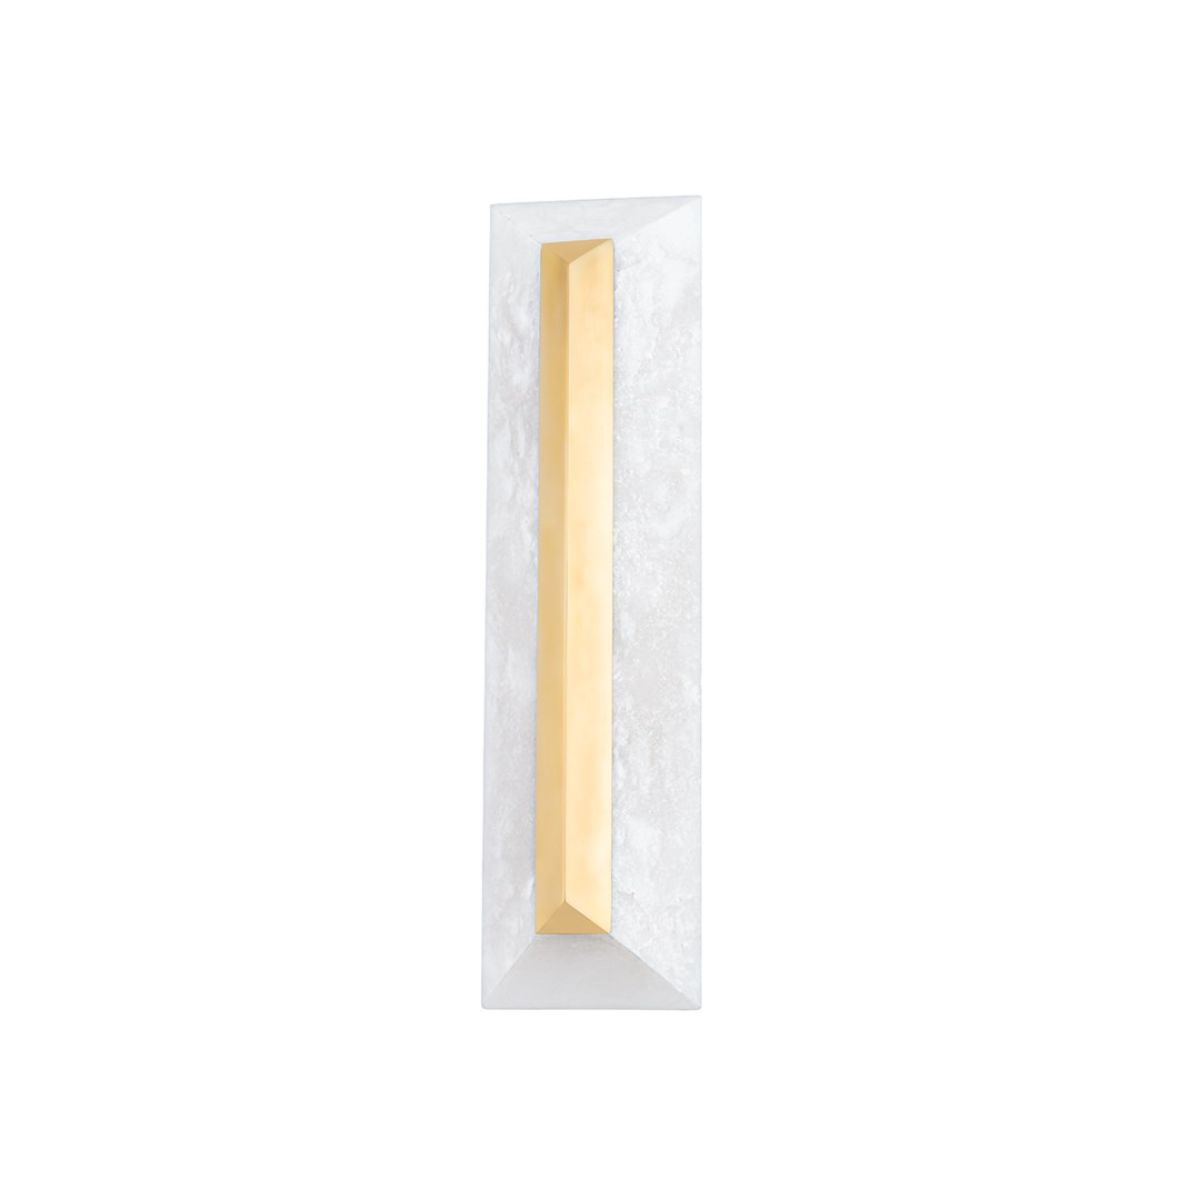 Perth 20 in. LED Wall Sconce vintage brass Finish